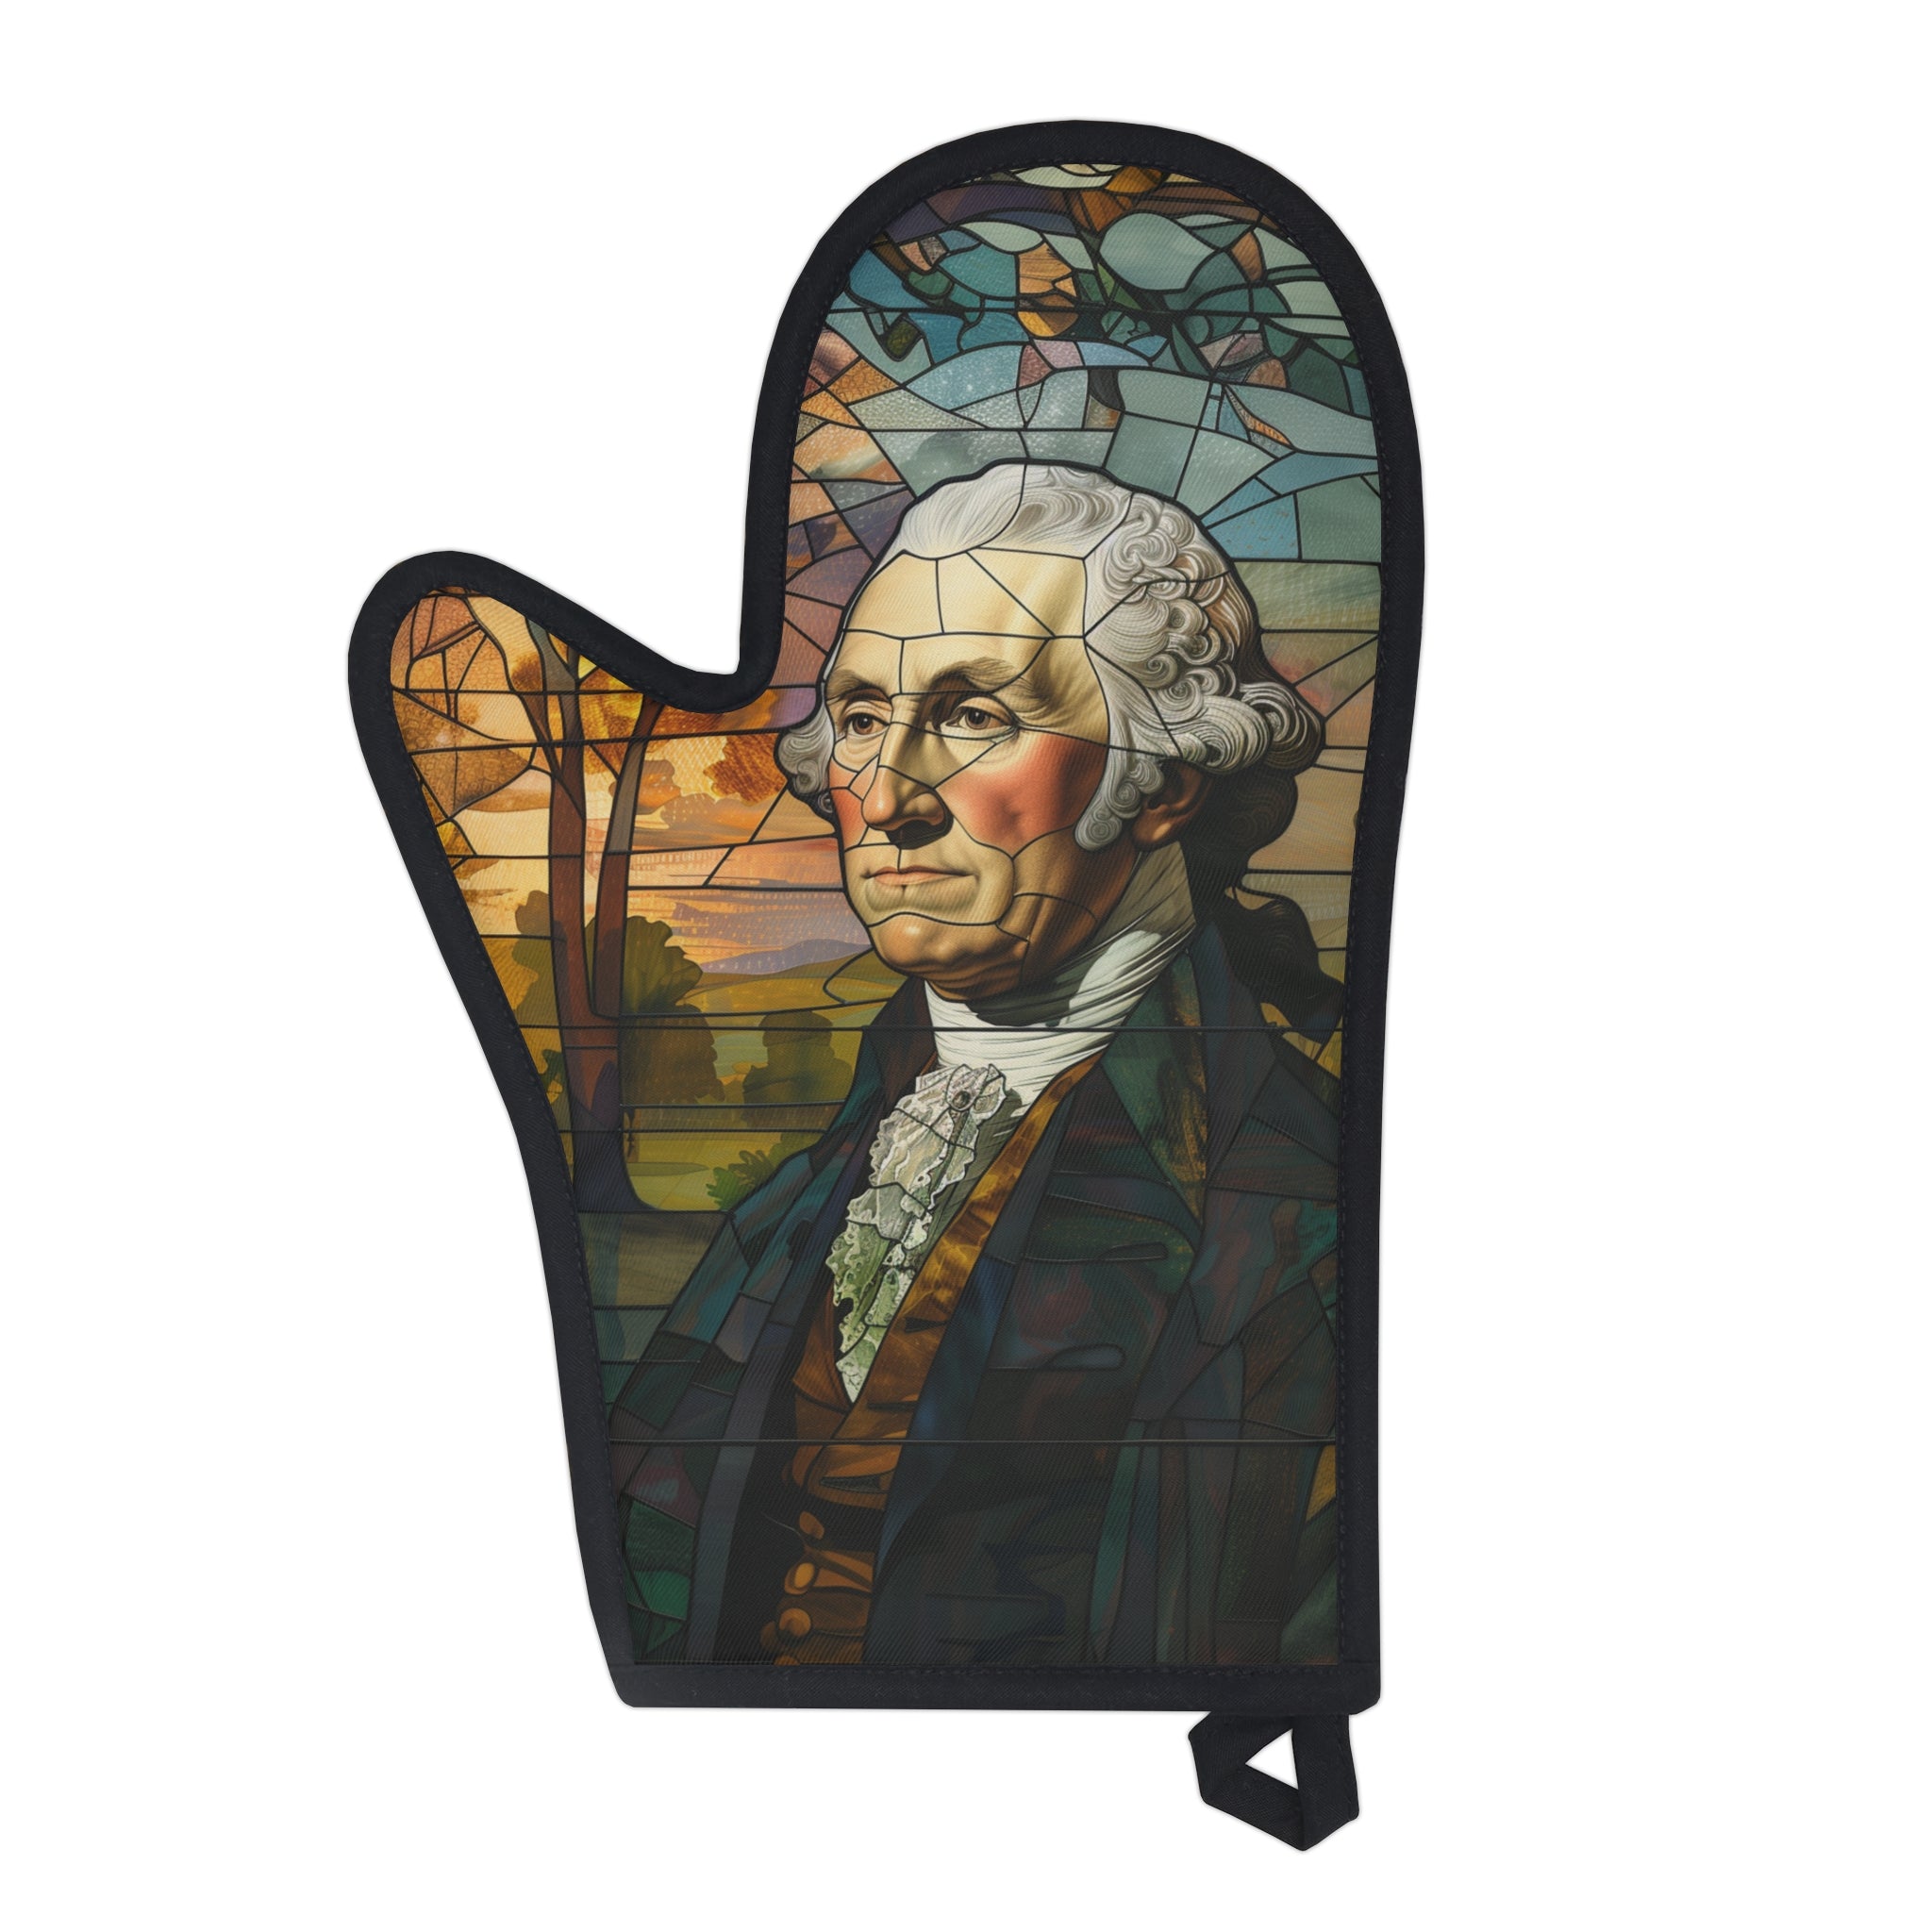 George Washington Stained Glass Oven Mitt